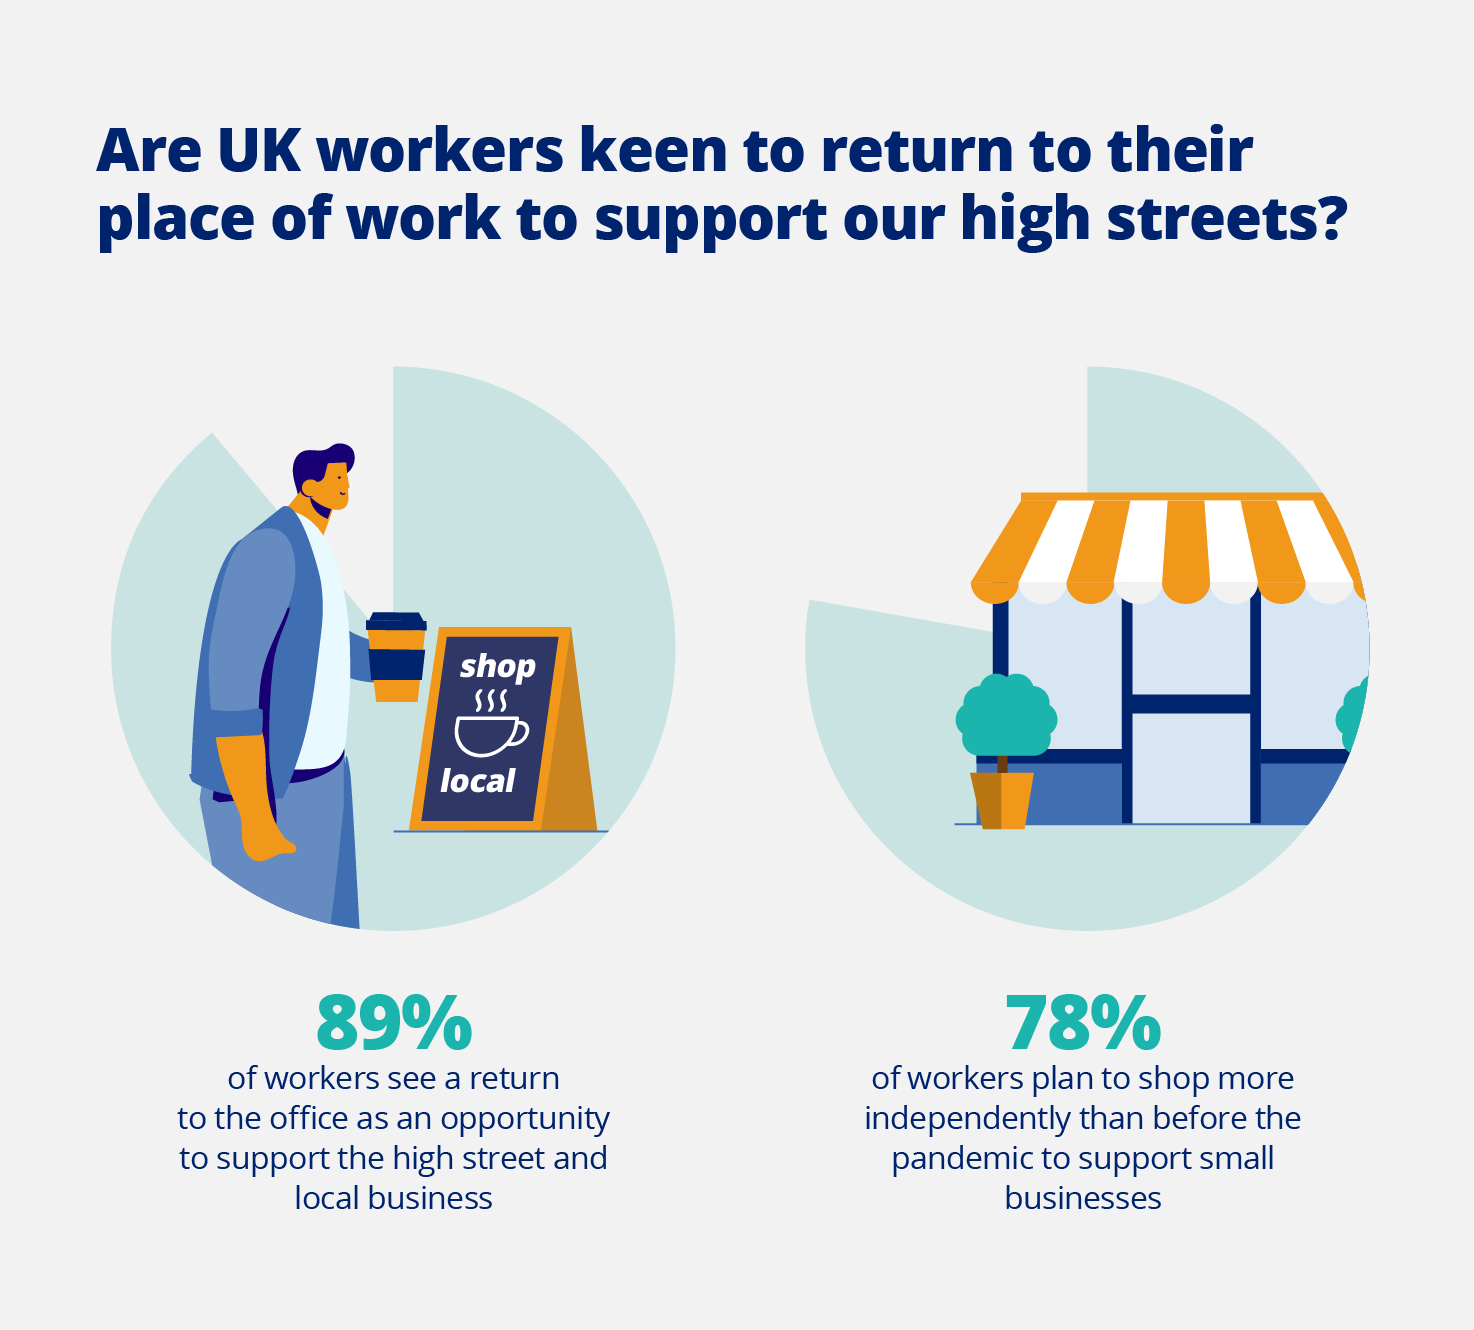 UK workers are keen to return to their place of work to support our high streets